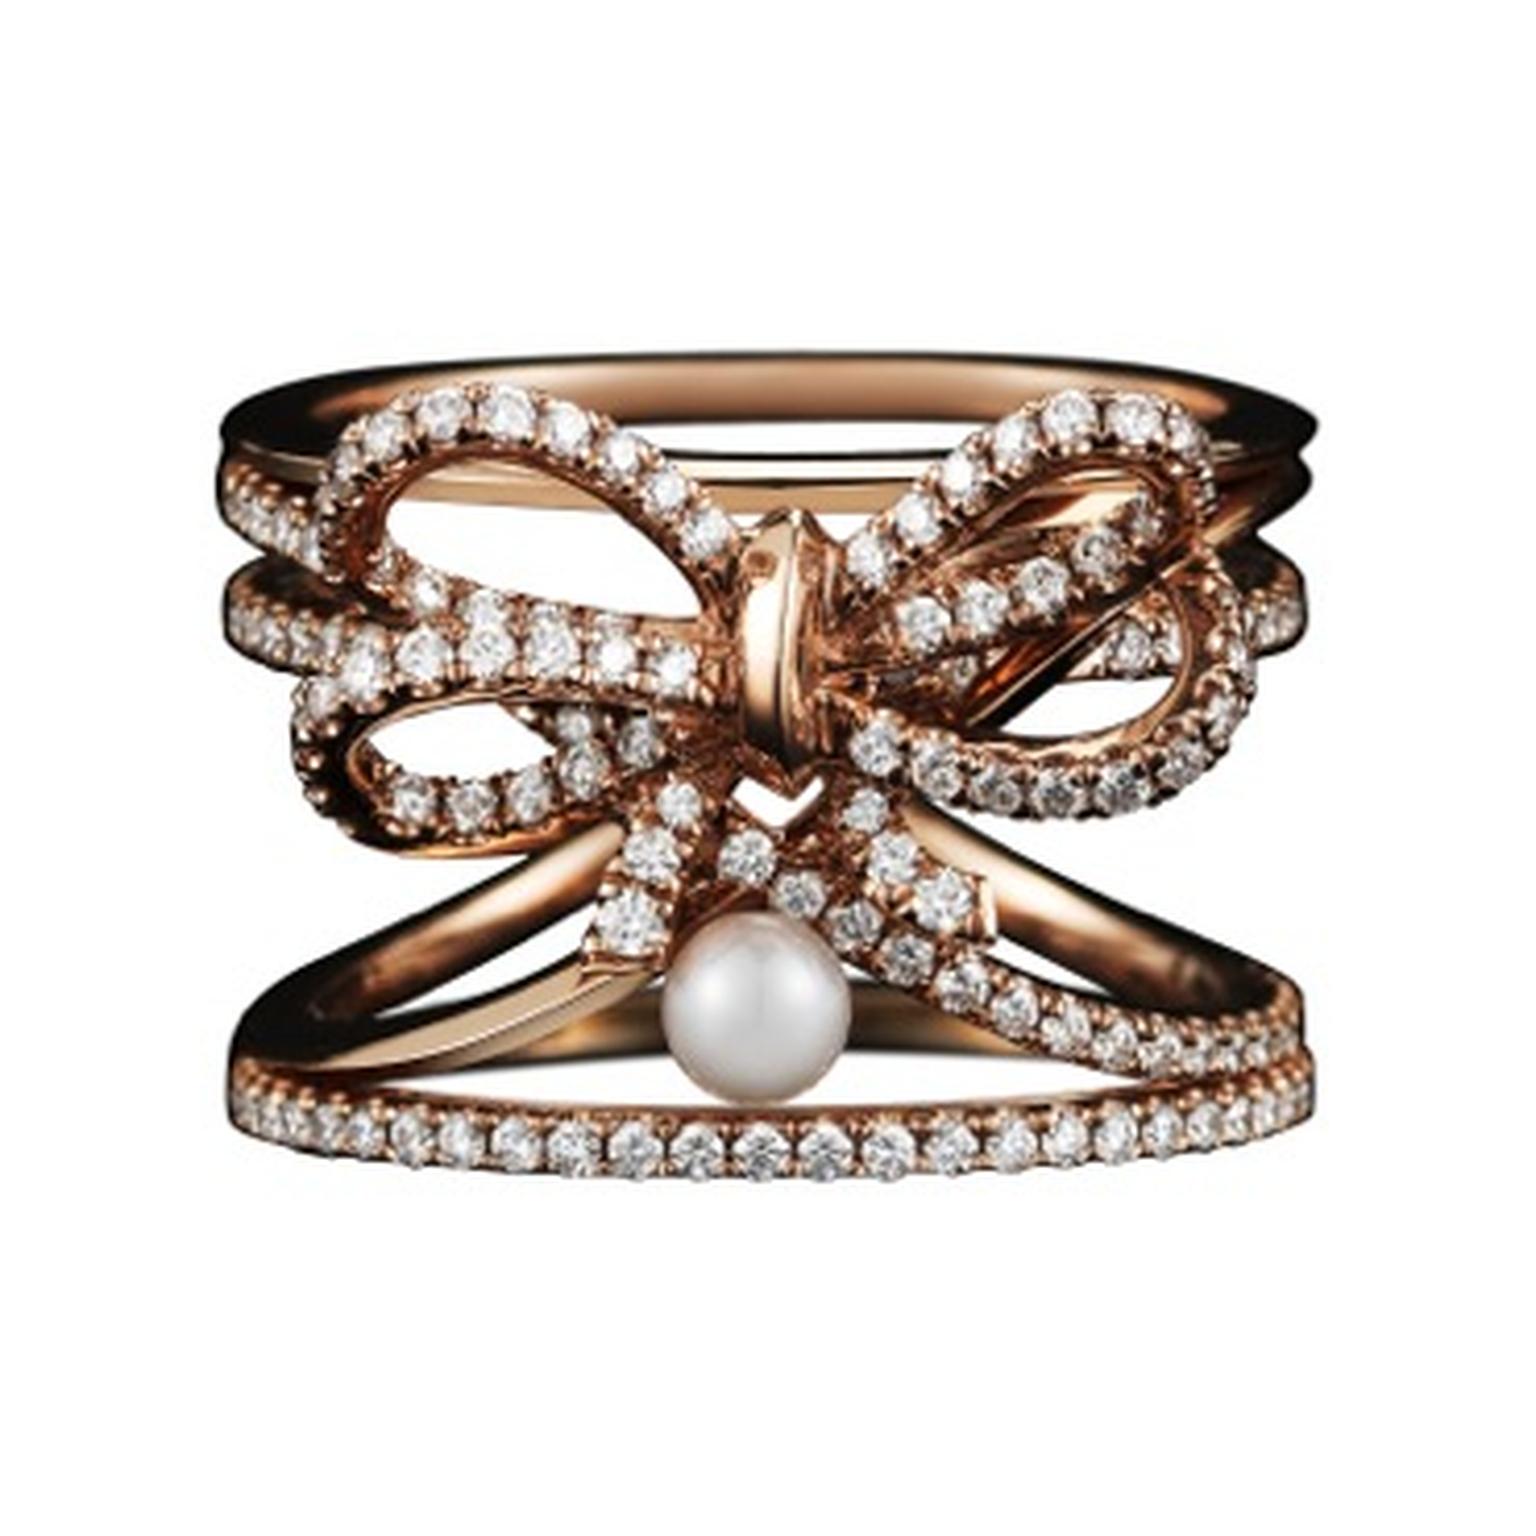 Alexandra Mor contemporary diamond bow and pearl ring in rose gold.